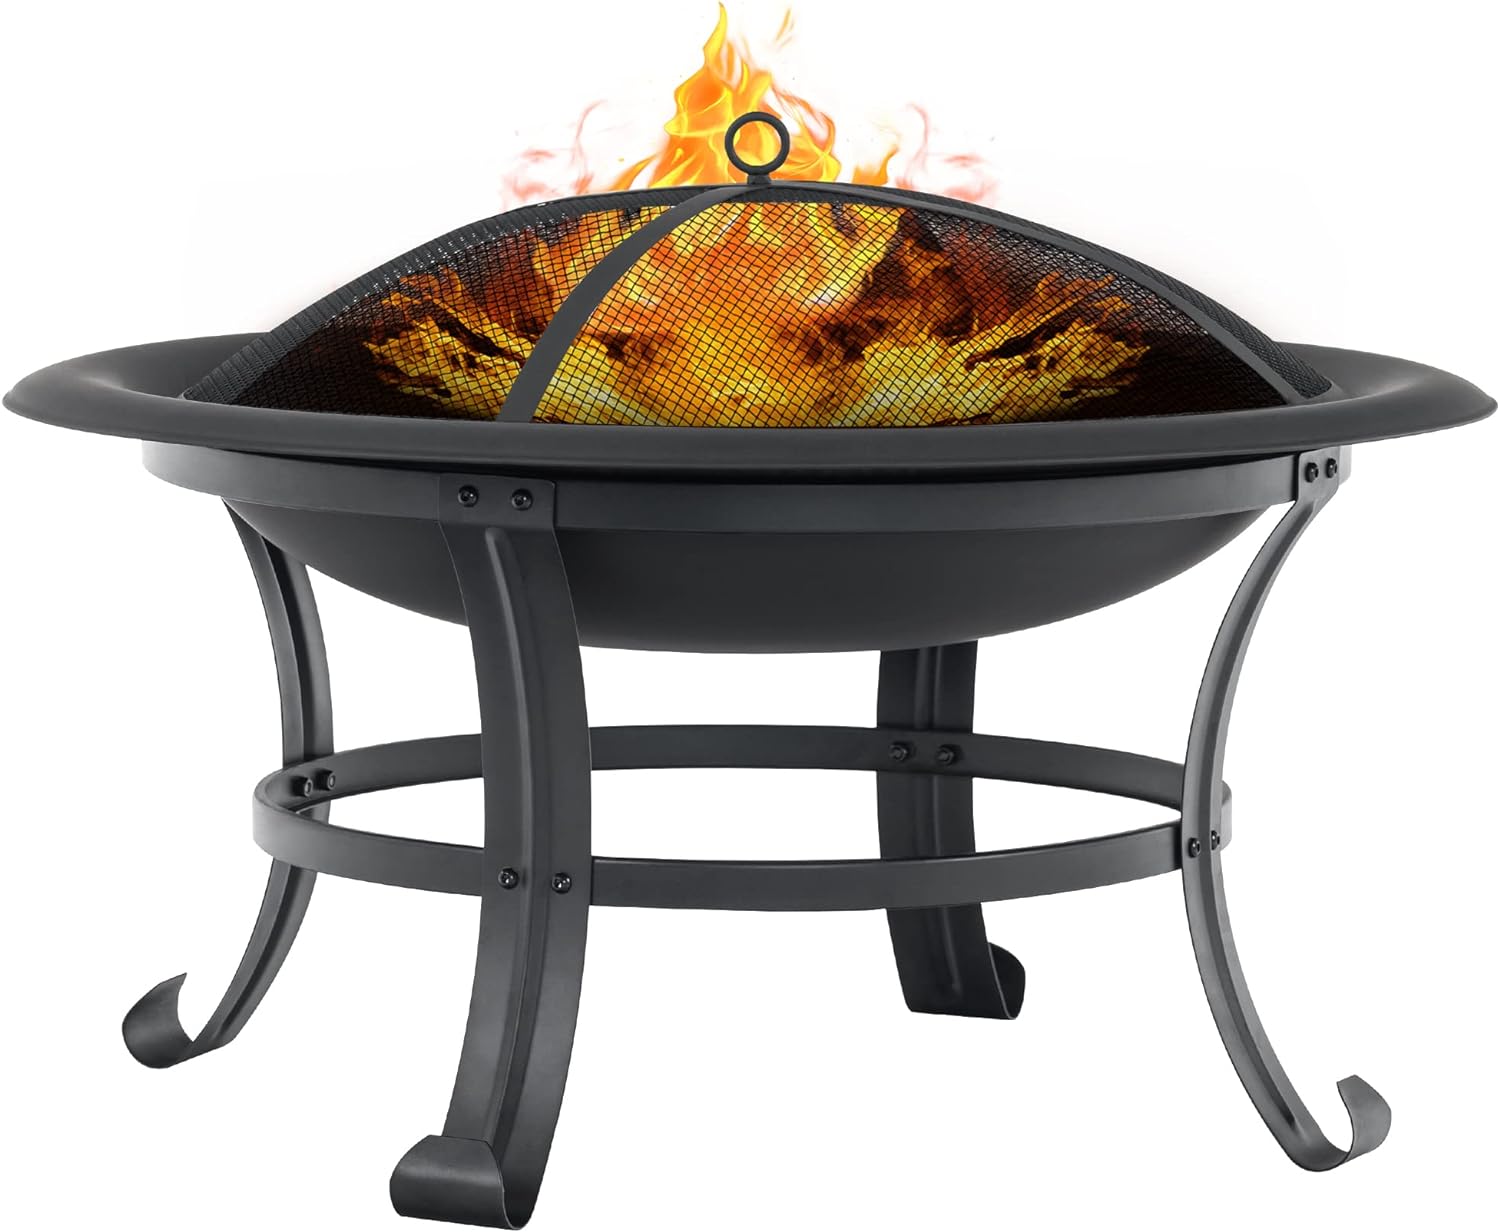 MCombo 30" Metal Black Fire Pit Round Table Backyard Patio Terrace Fire Bowl Heater/BBQ/Ice Pit with Charcoal Rack Waterproof Co